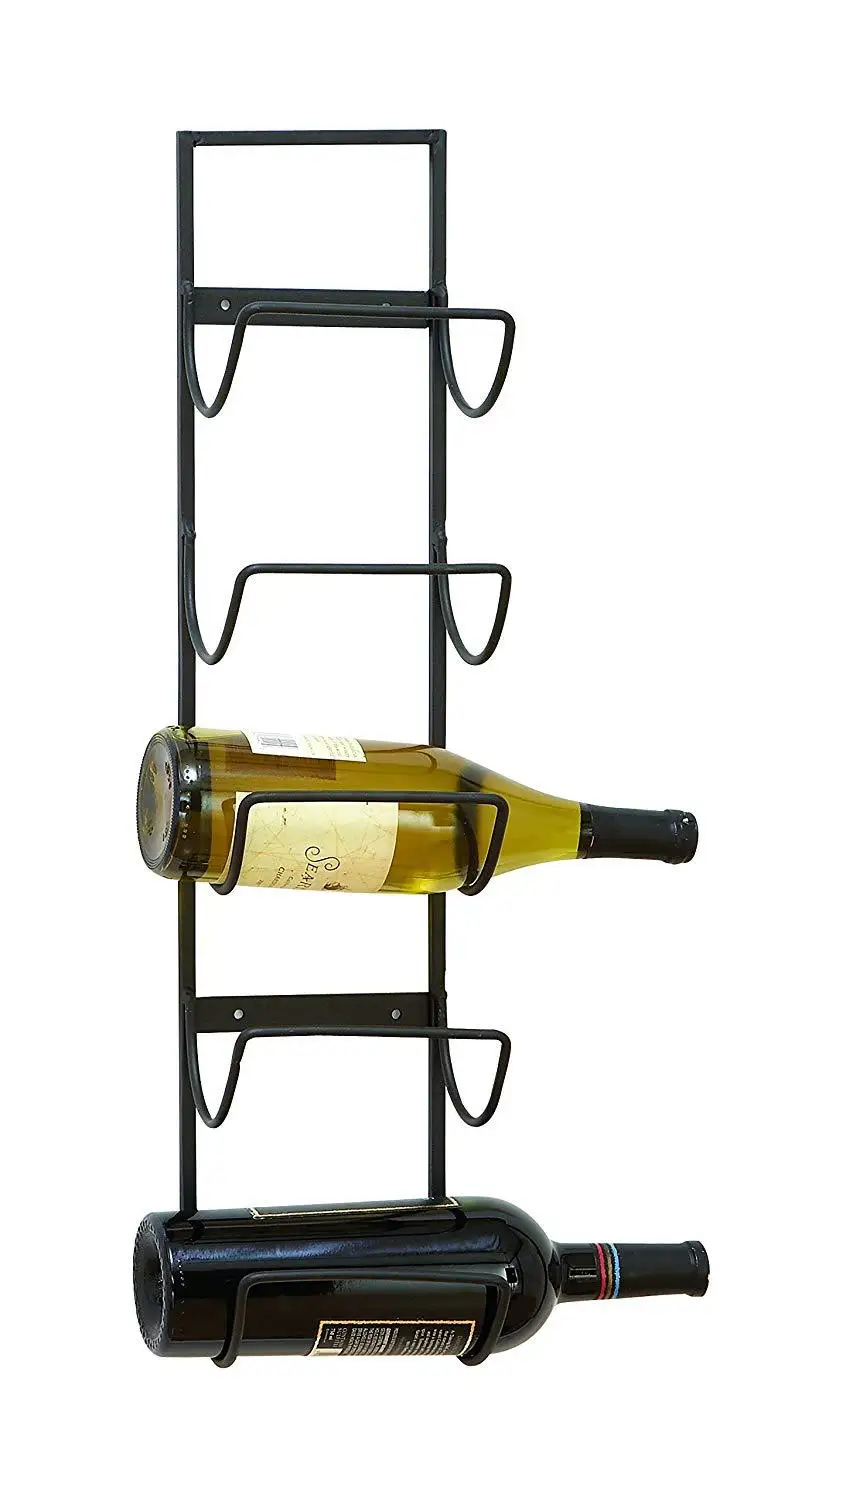 Home Hanging Wine Glass Holder Wall Red Wine Holder Wine Glass Holder